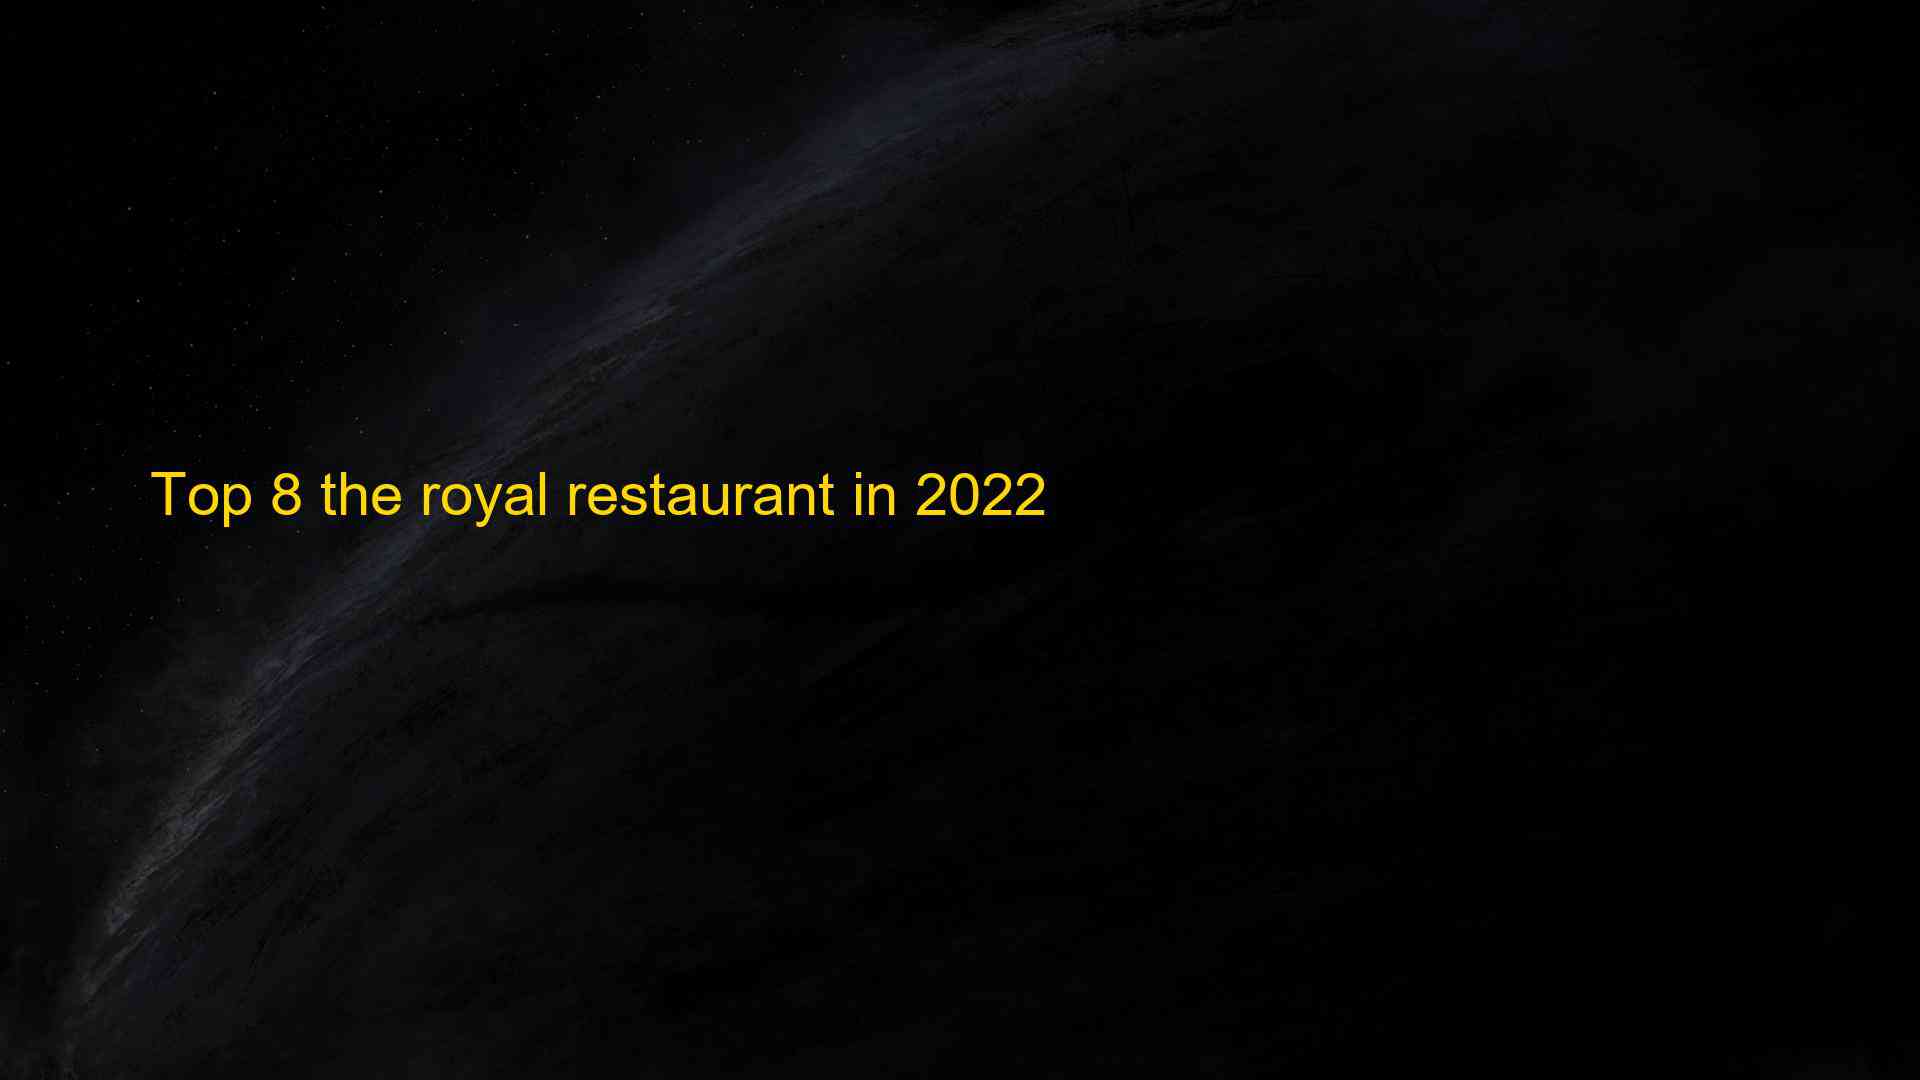 Top 8 the royal restaurant in 2022 1663393182